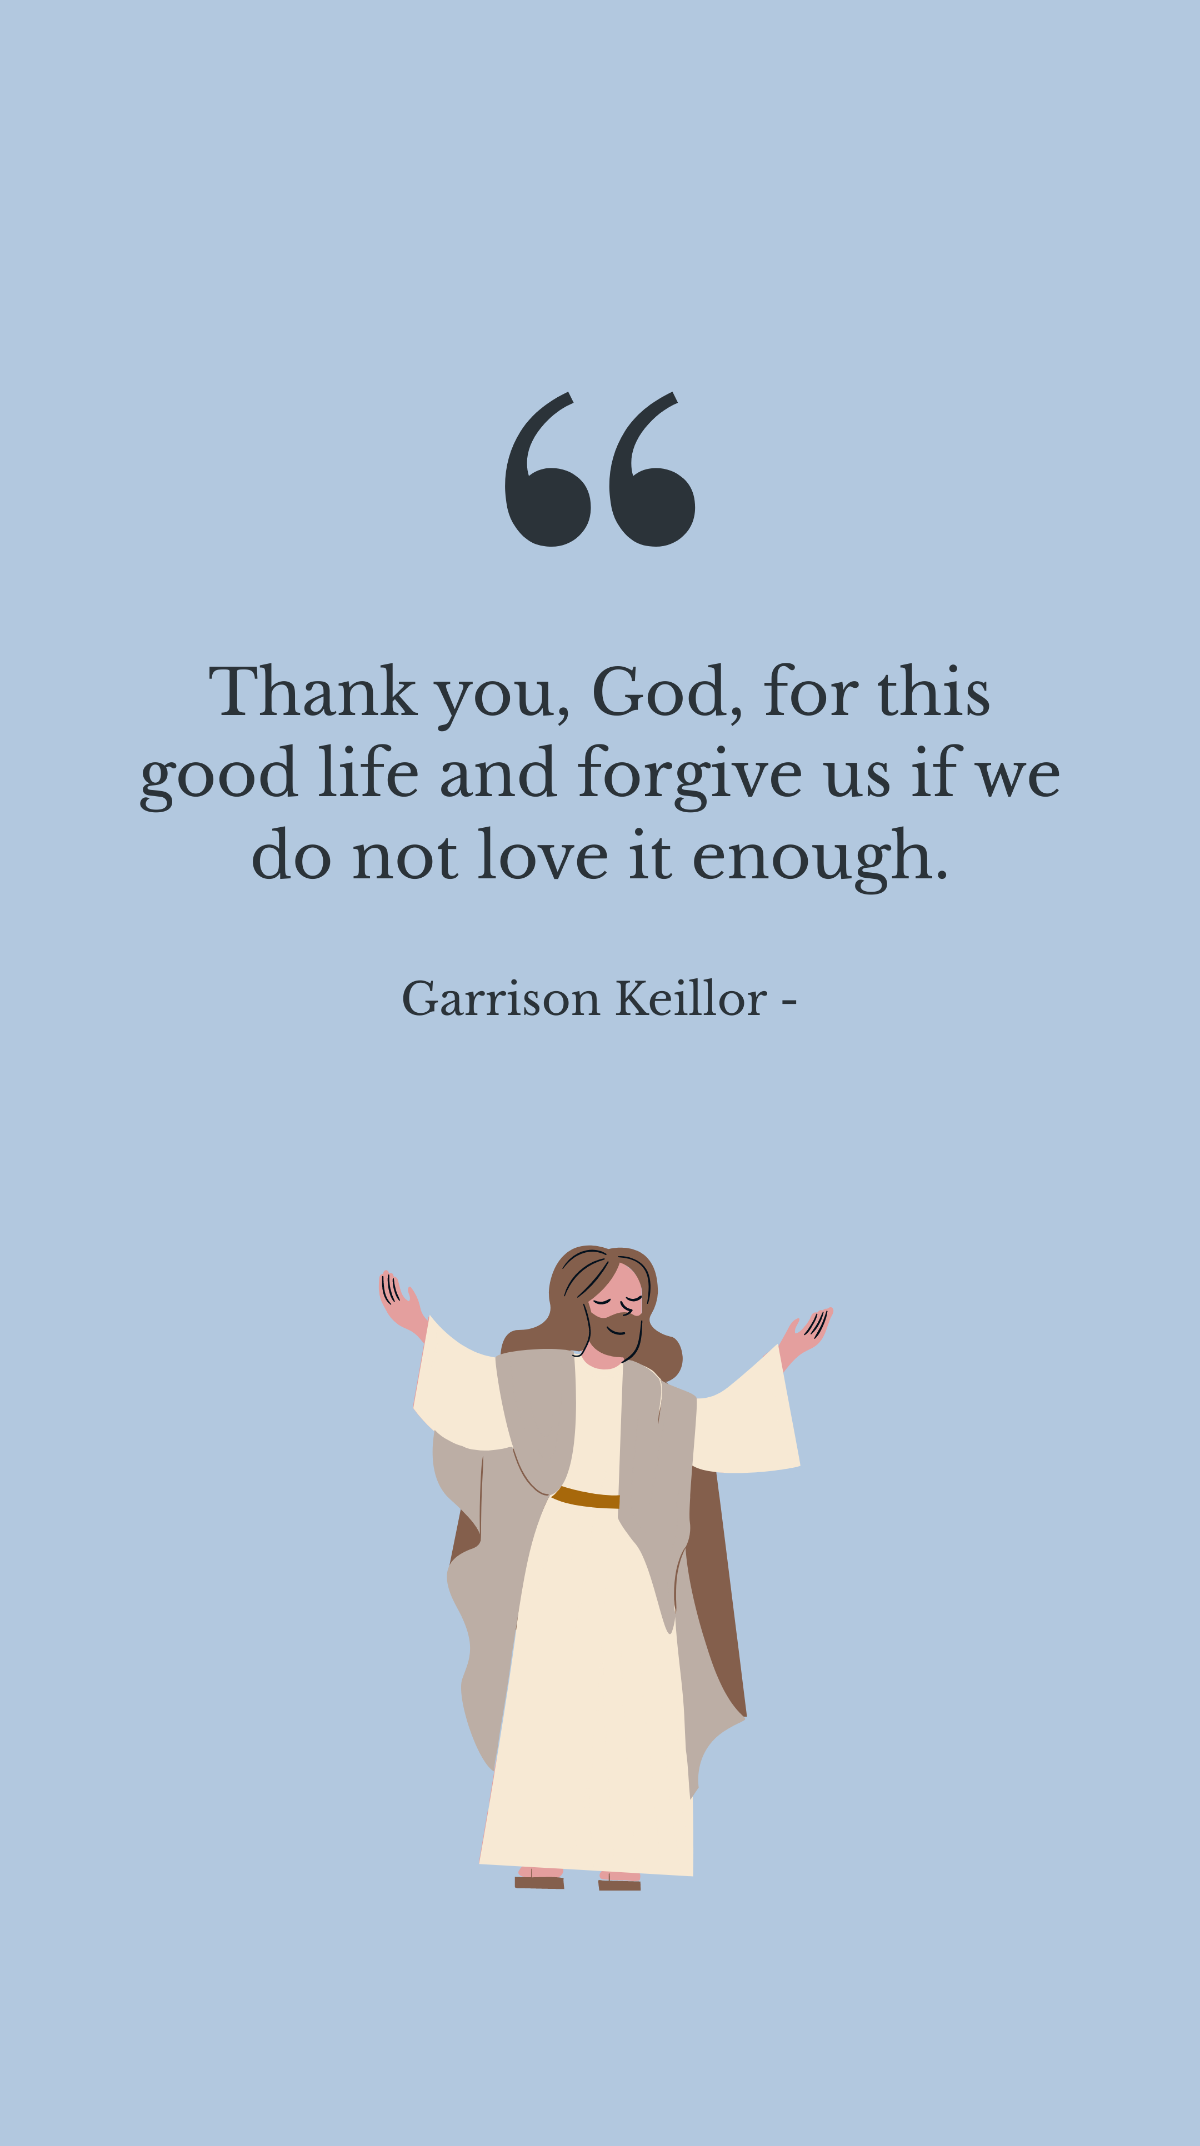 Garrison Keillor - Thank you, God, for this good life and forgive us if we do not love it enough. Template